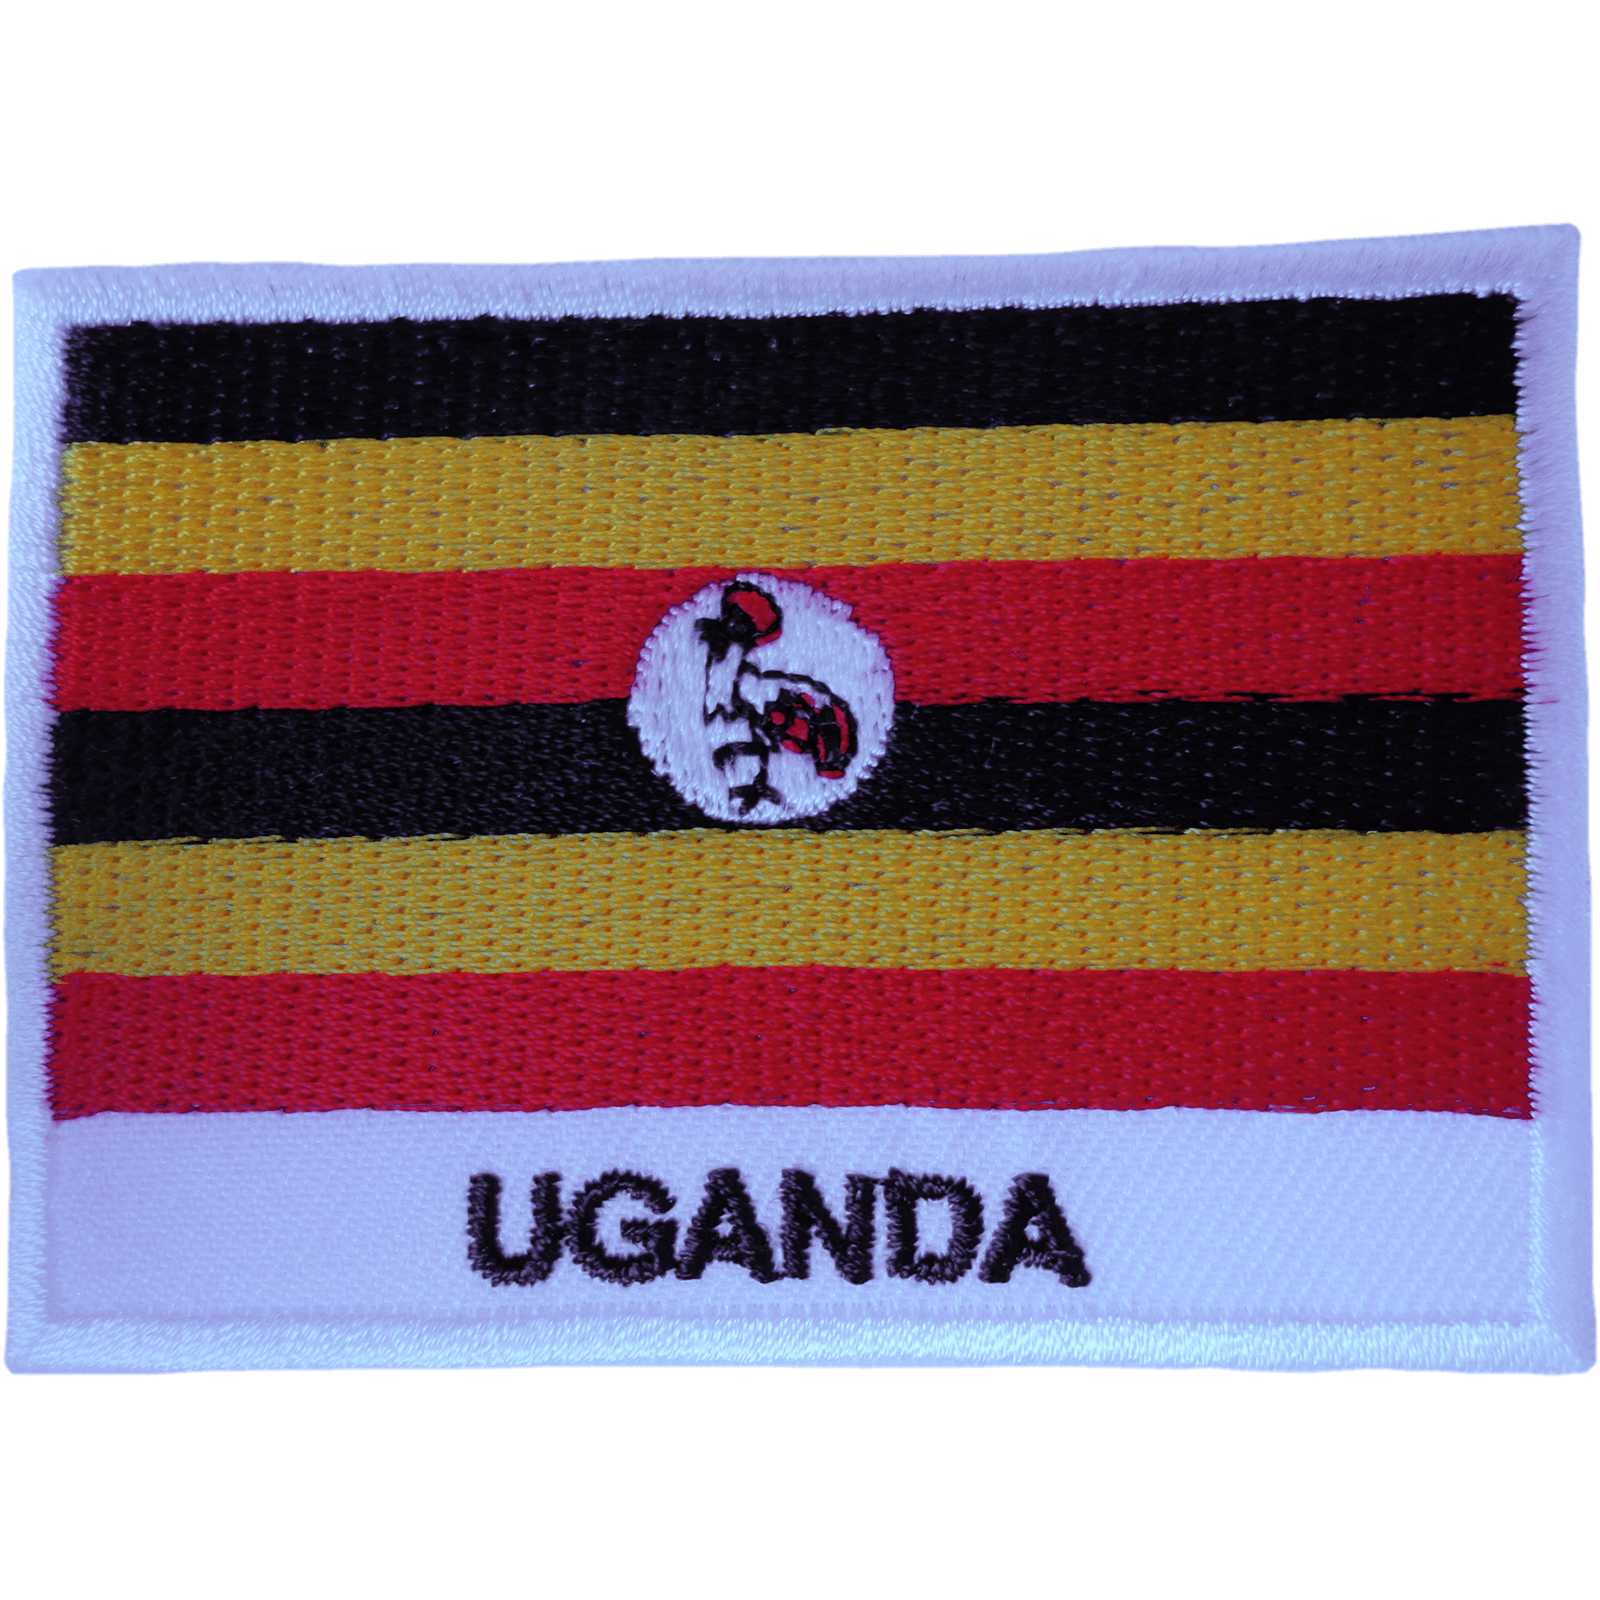 Uganda Flag Patch Iron Sew On Clothes Jacket Jeans Bag Africa Embroidered Badge